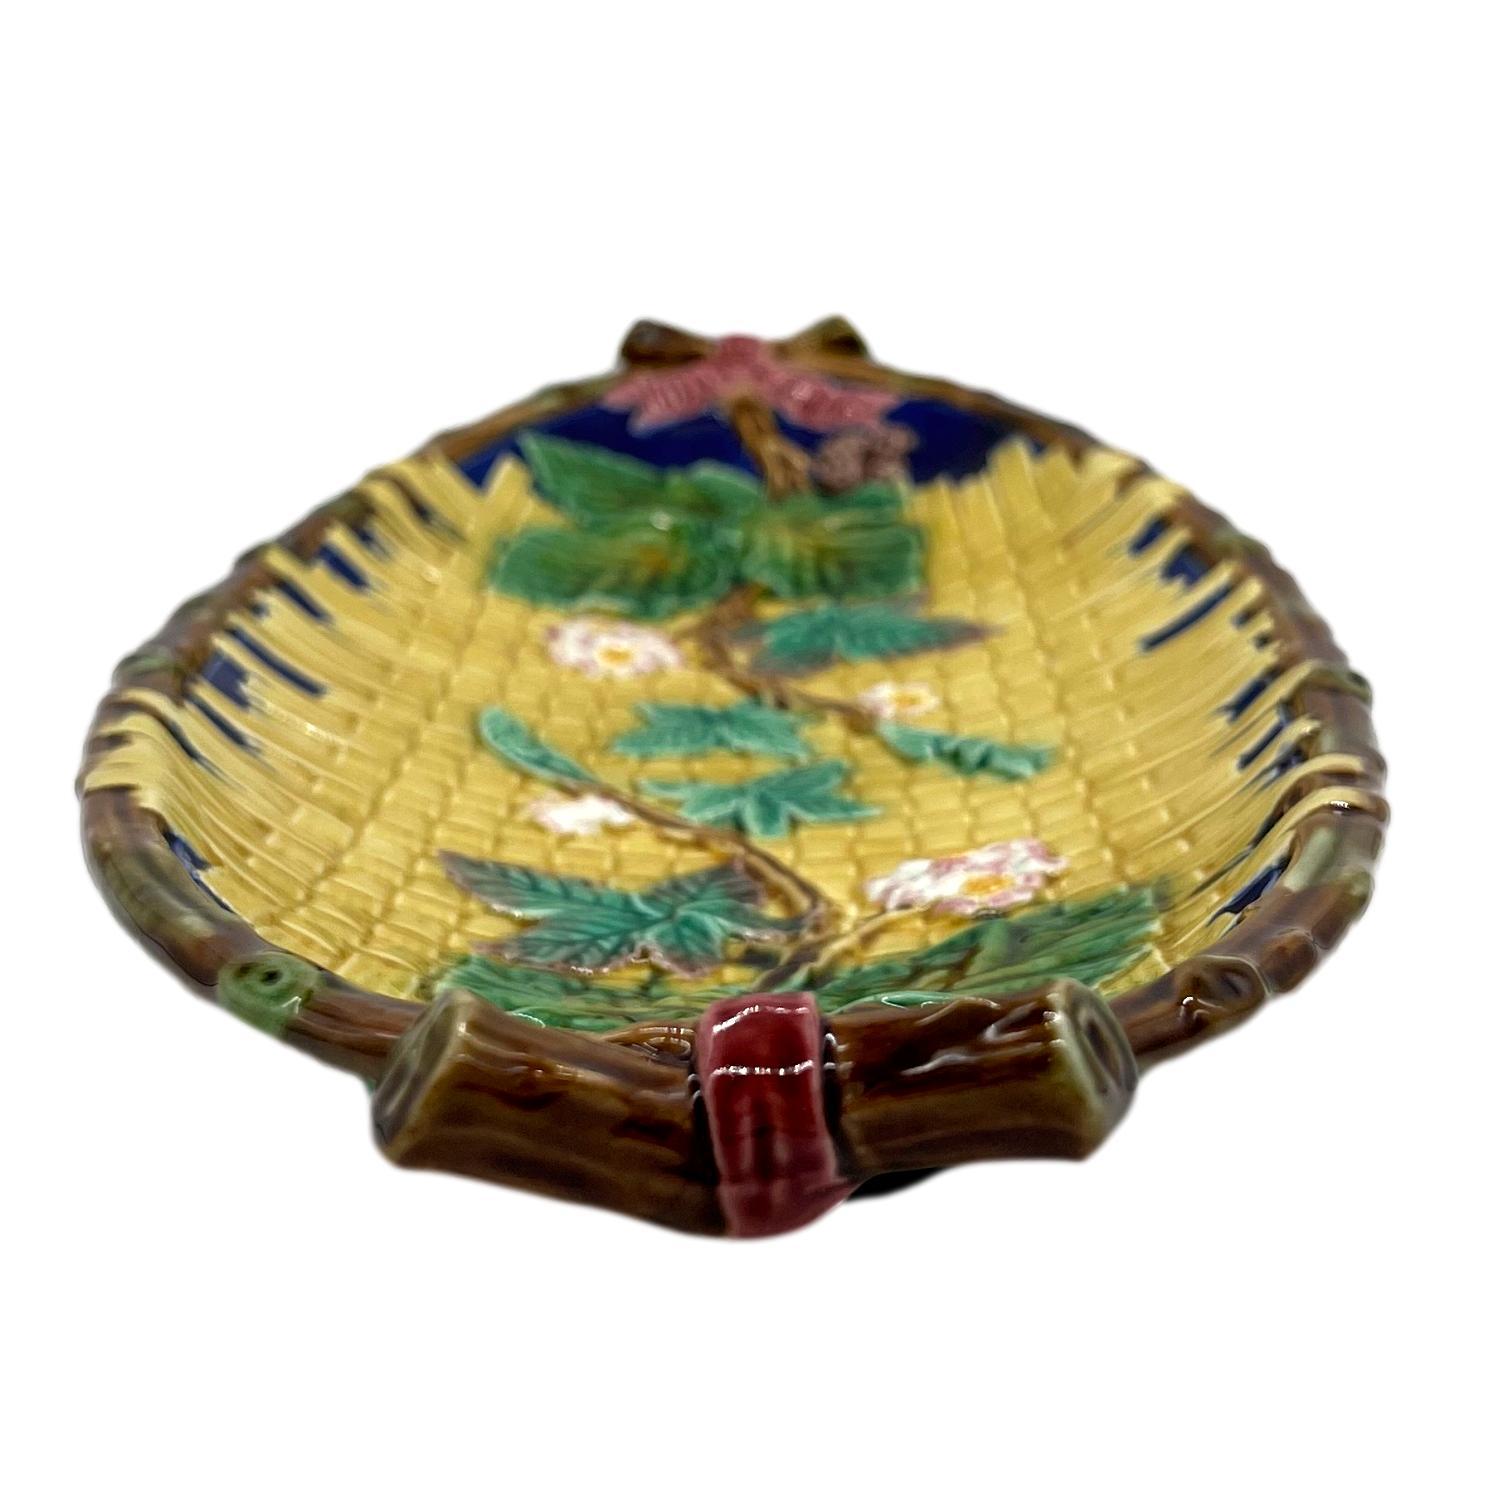 Brown-Westhead, Moore Majolica Oblong Tray, Yellow on Cobalt Ground, ca. 1875 3